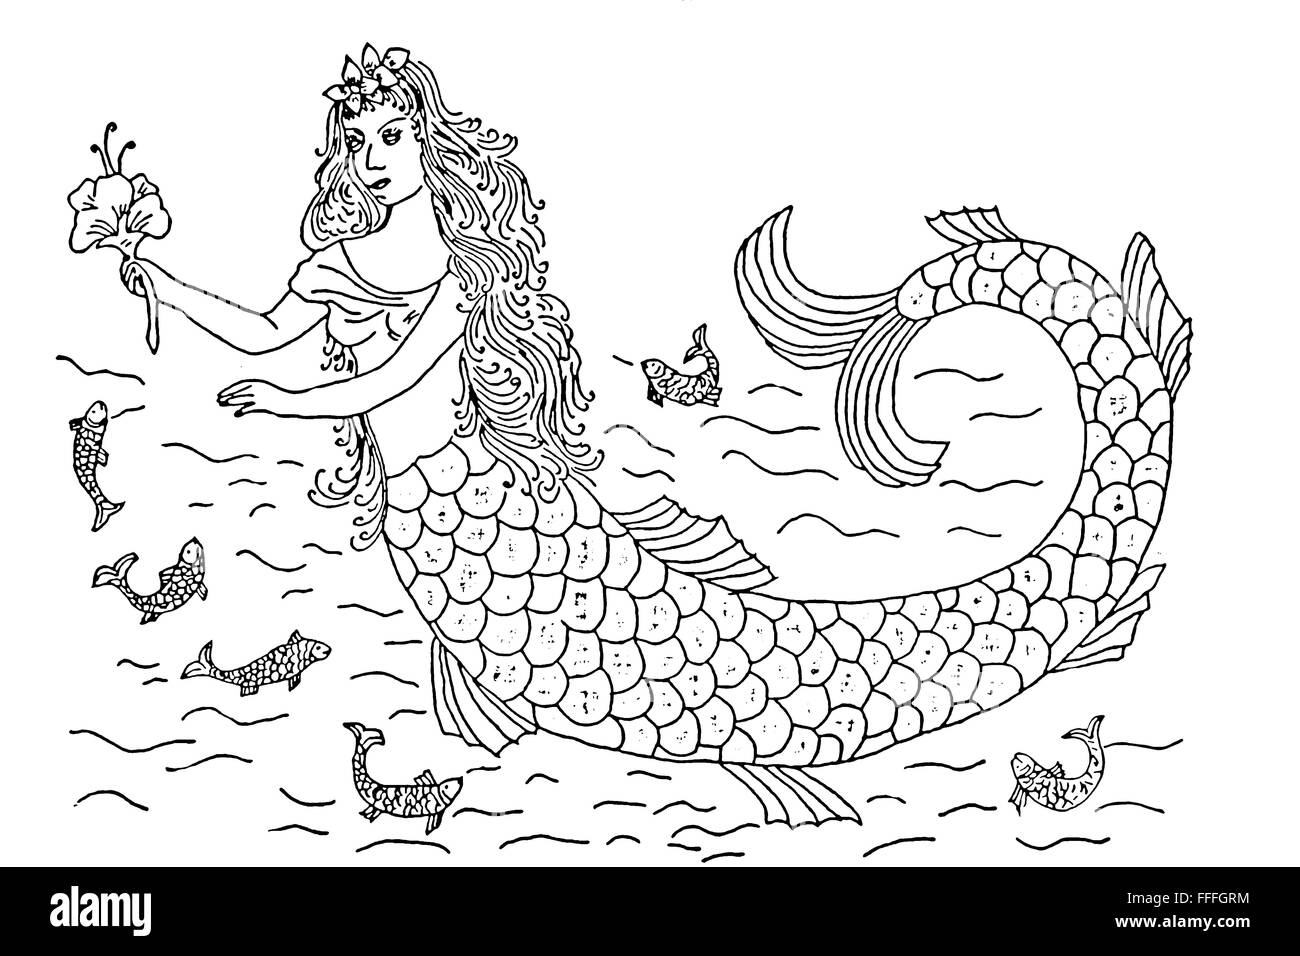 outlined mermaid Stock Photo